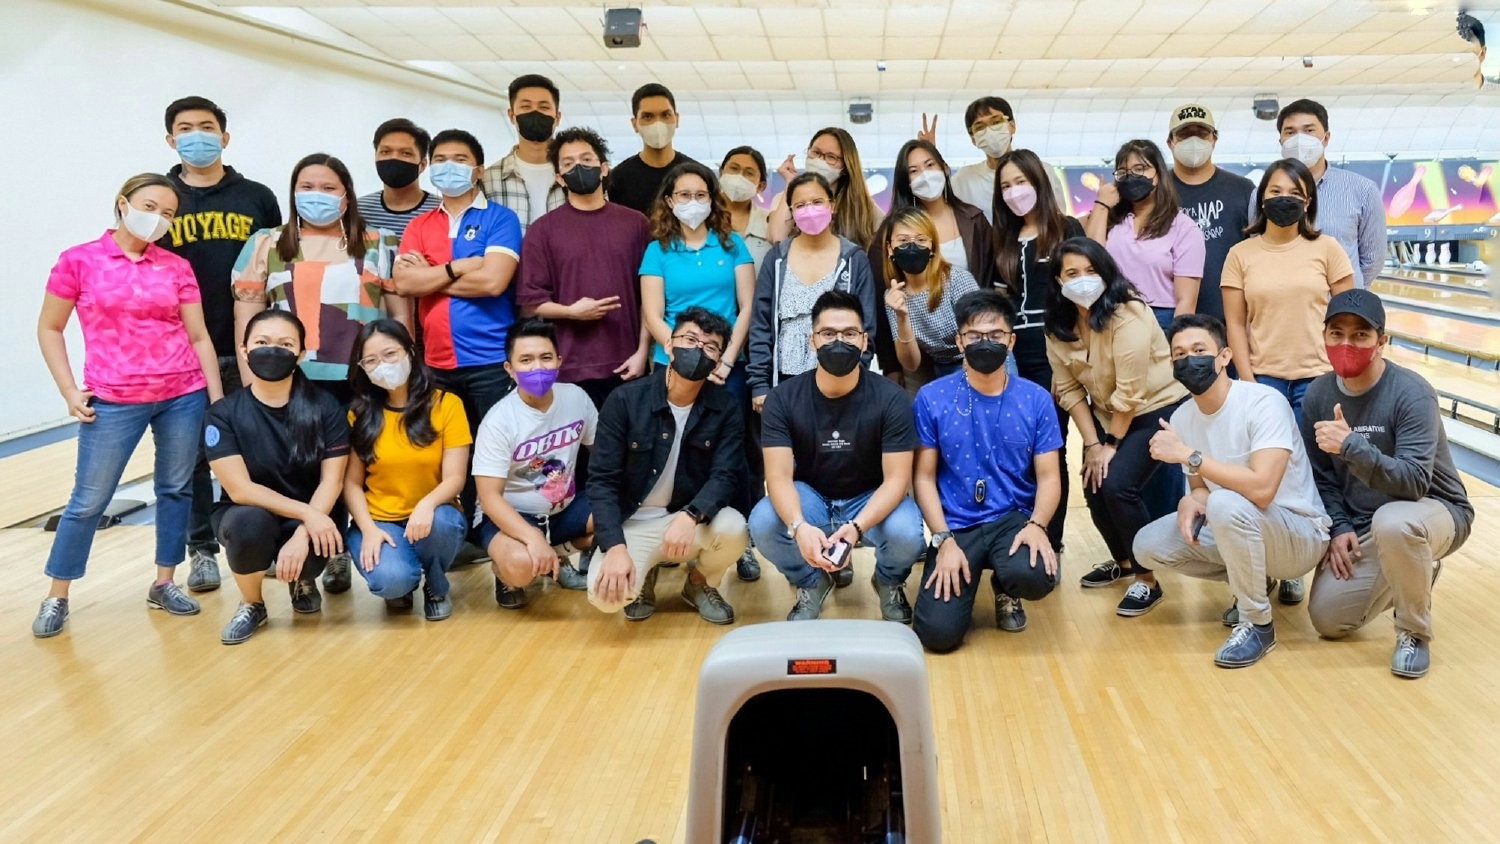 Manila Culture Club employees gathered for a night of bowling.